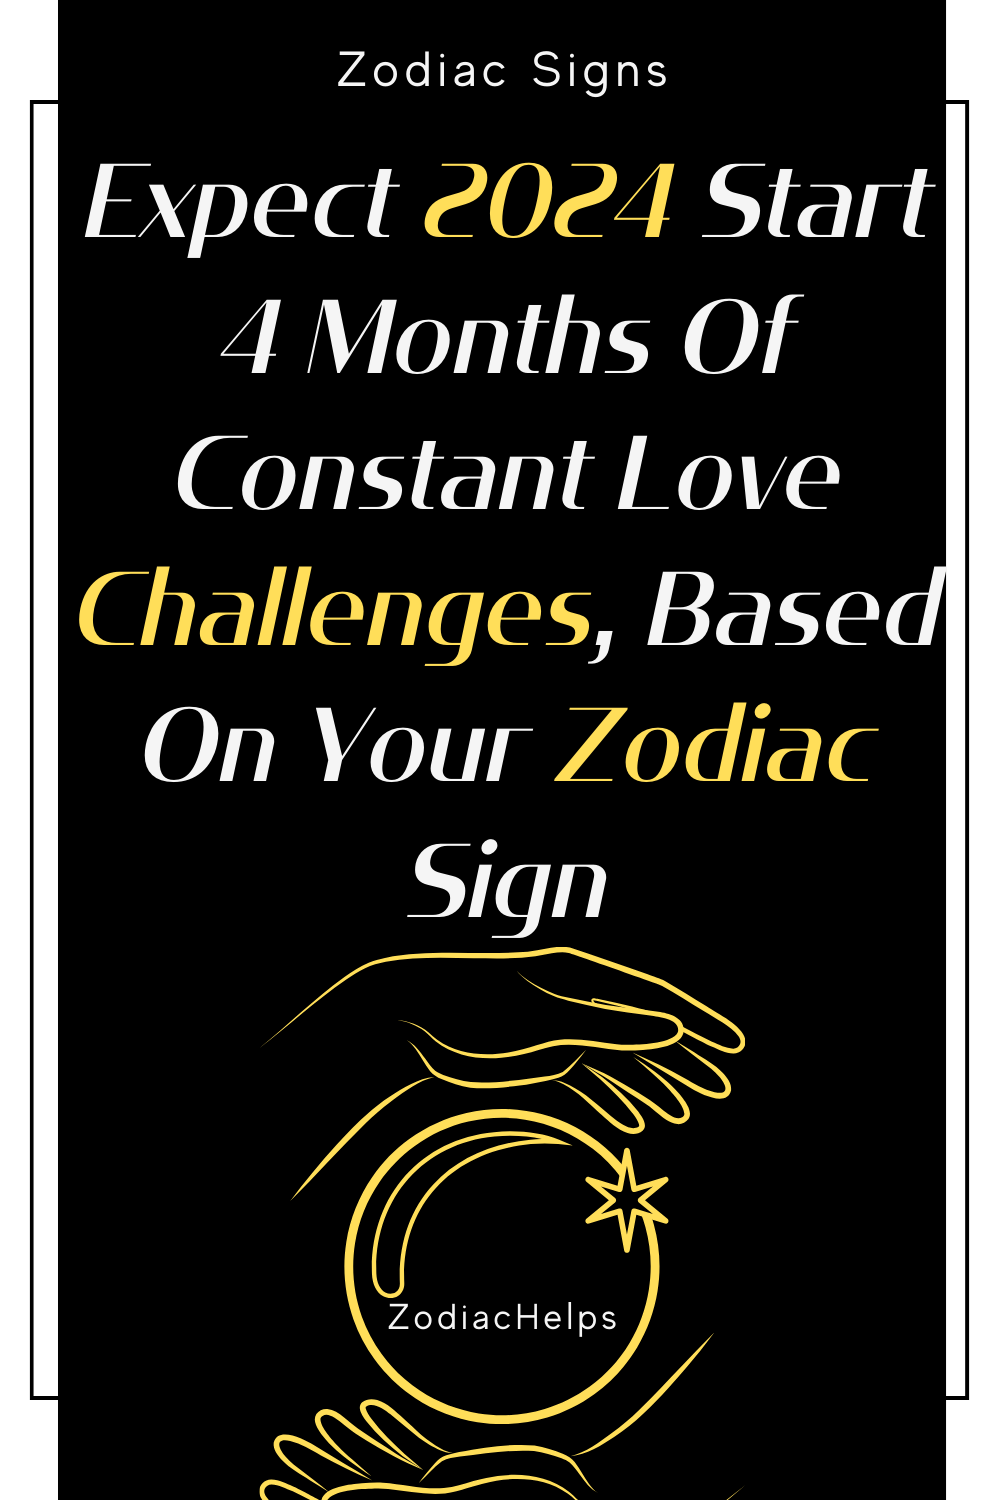 Expect 2024 Start 4 Months Of Constant Love Challenges, Based On Your Zodiac Sign